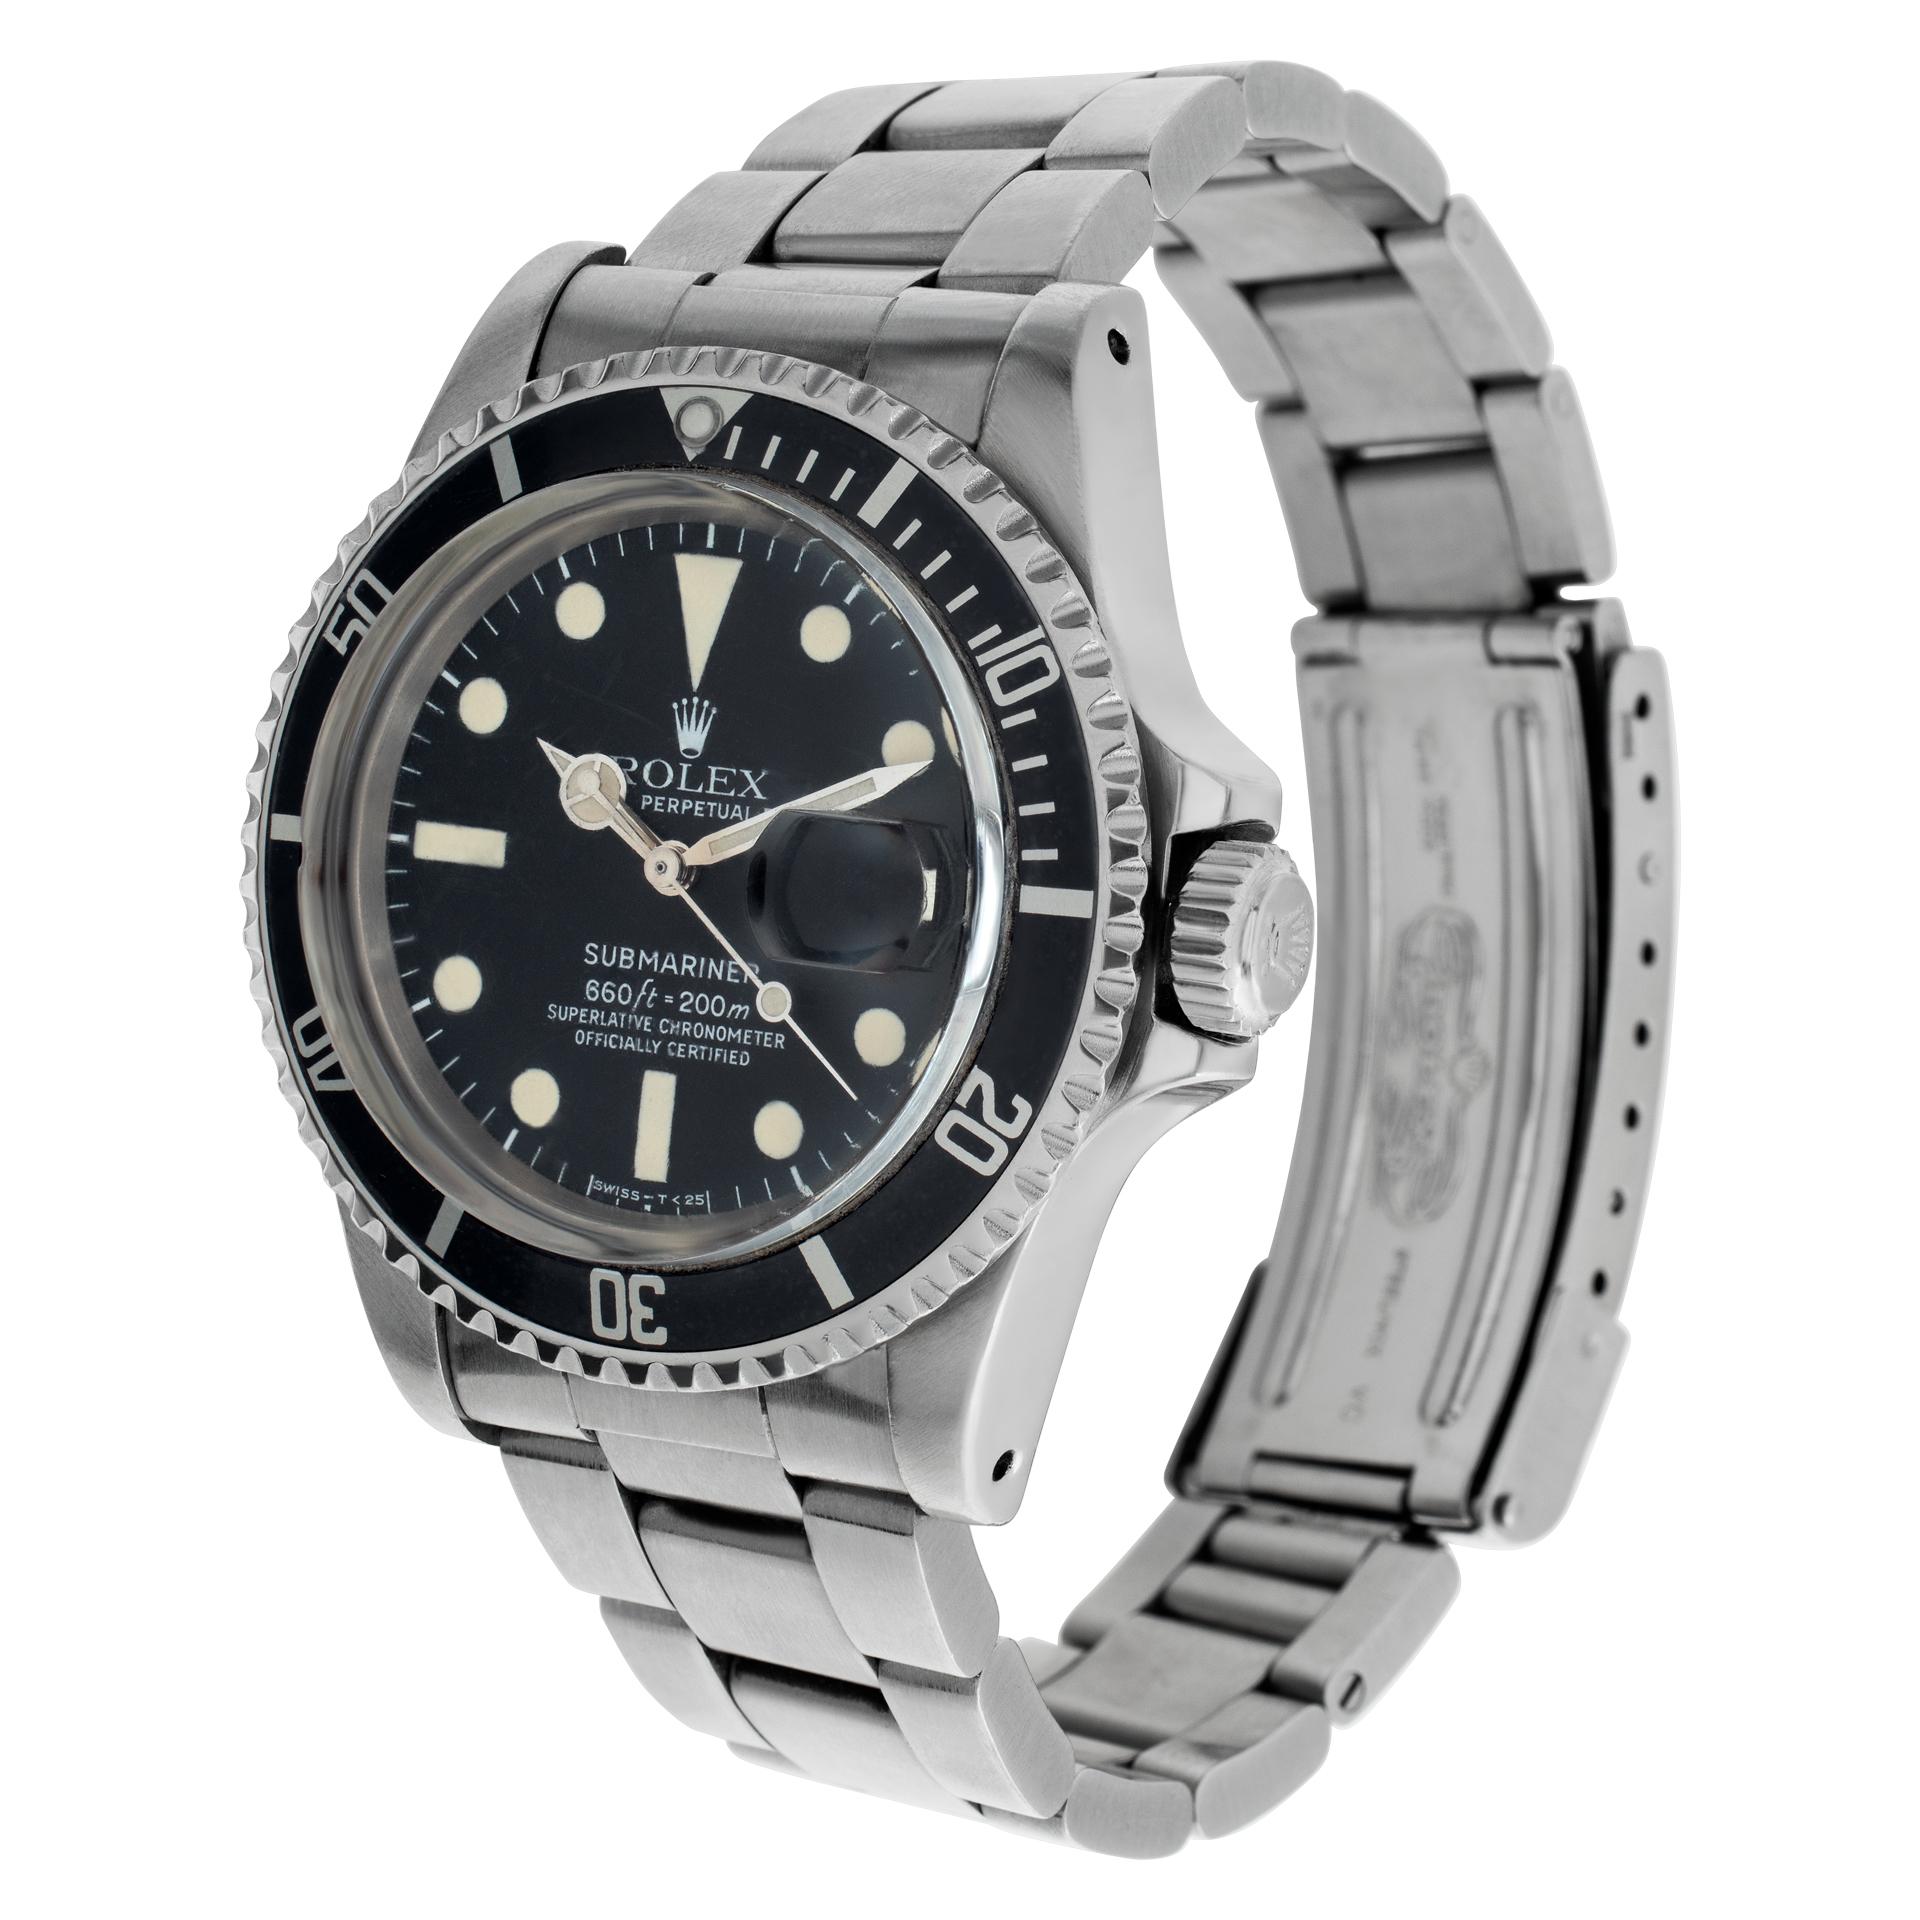 Rolex Submariner Mark I in stainless steel with black dial & bezel. Auto w/ sweep seconds and date. 40 mm case size. **Bank wire only at this price** Ref 1680. Circa 1978. Fine Pre-owned Rolex Watch. Certified preowned Sport Rolex Submariner 1680